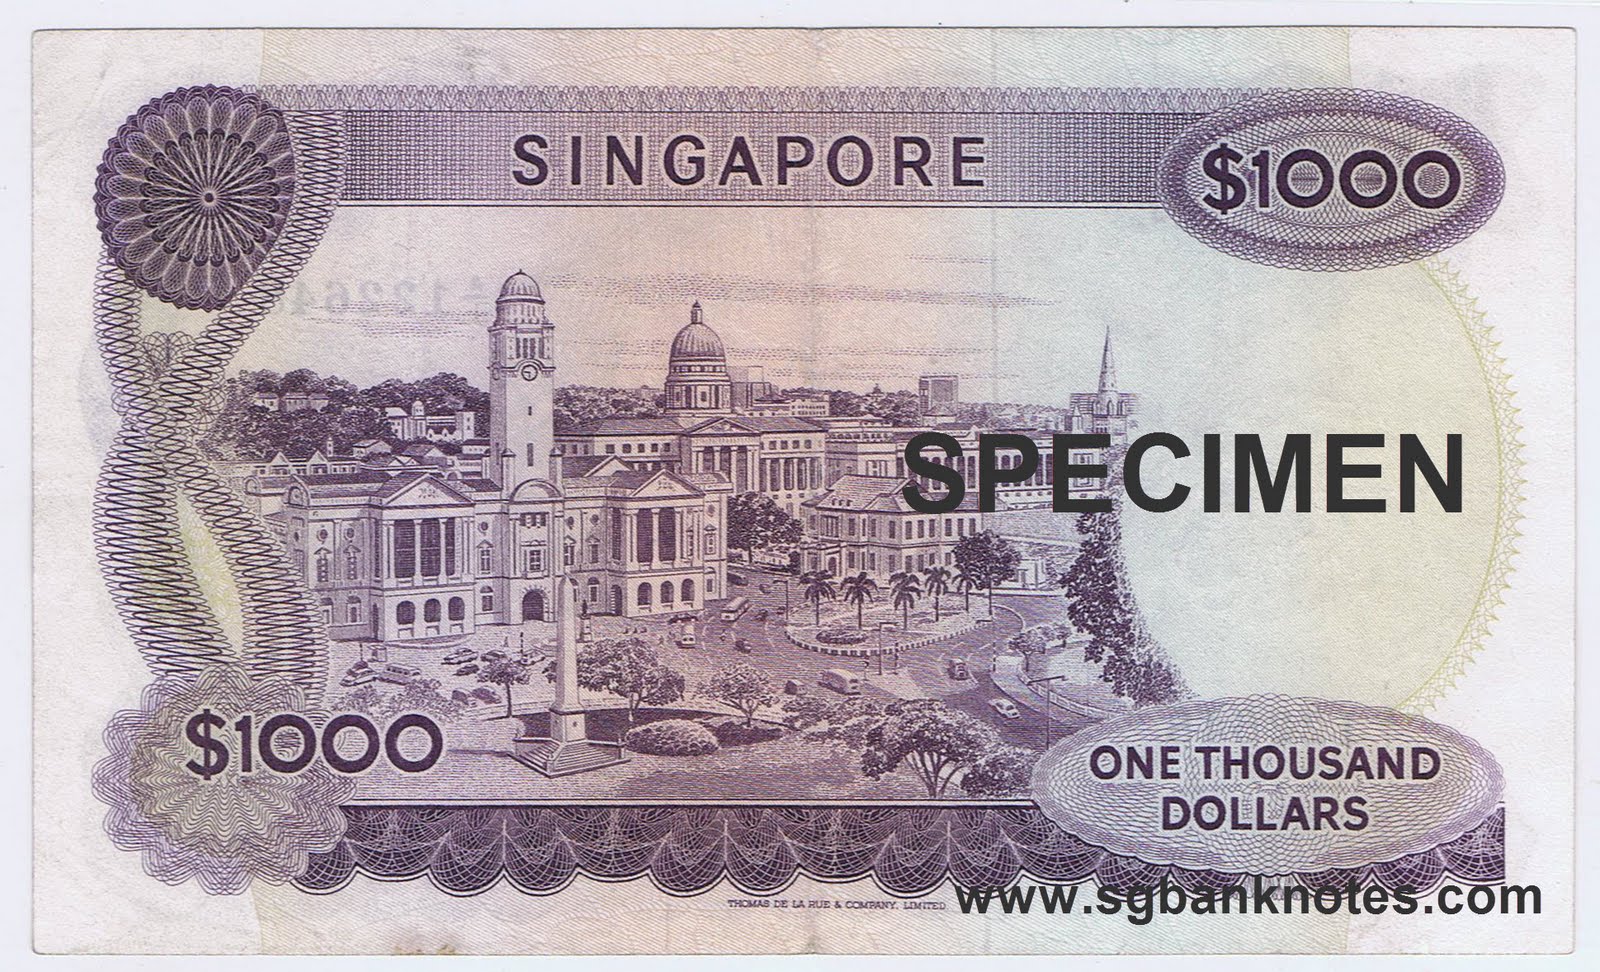 Cool Cars With YJ: Some Singapore Old Money & Big Money 